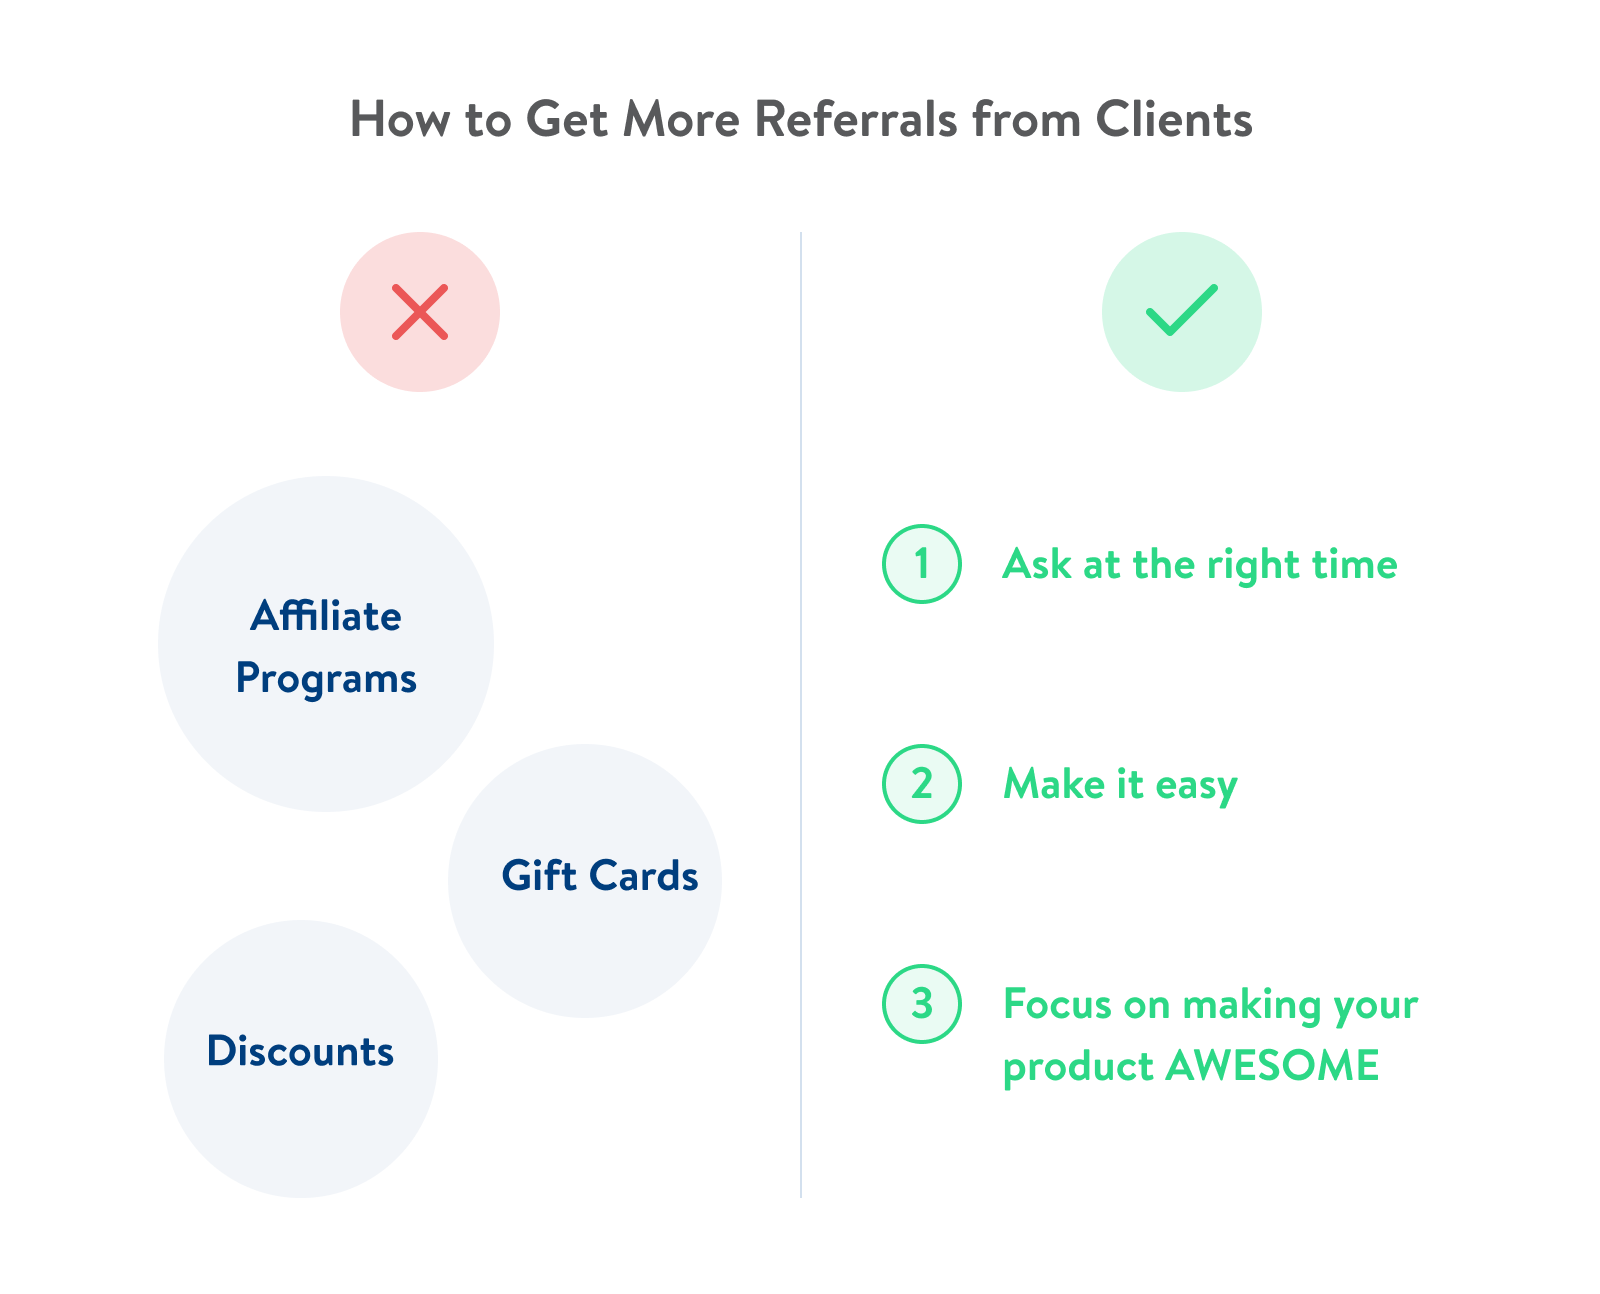 How to get more referrals from clients: You don't need 15 different tactics to get more referrals from clients; you just need one good strategy.